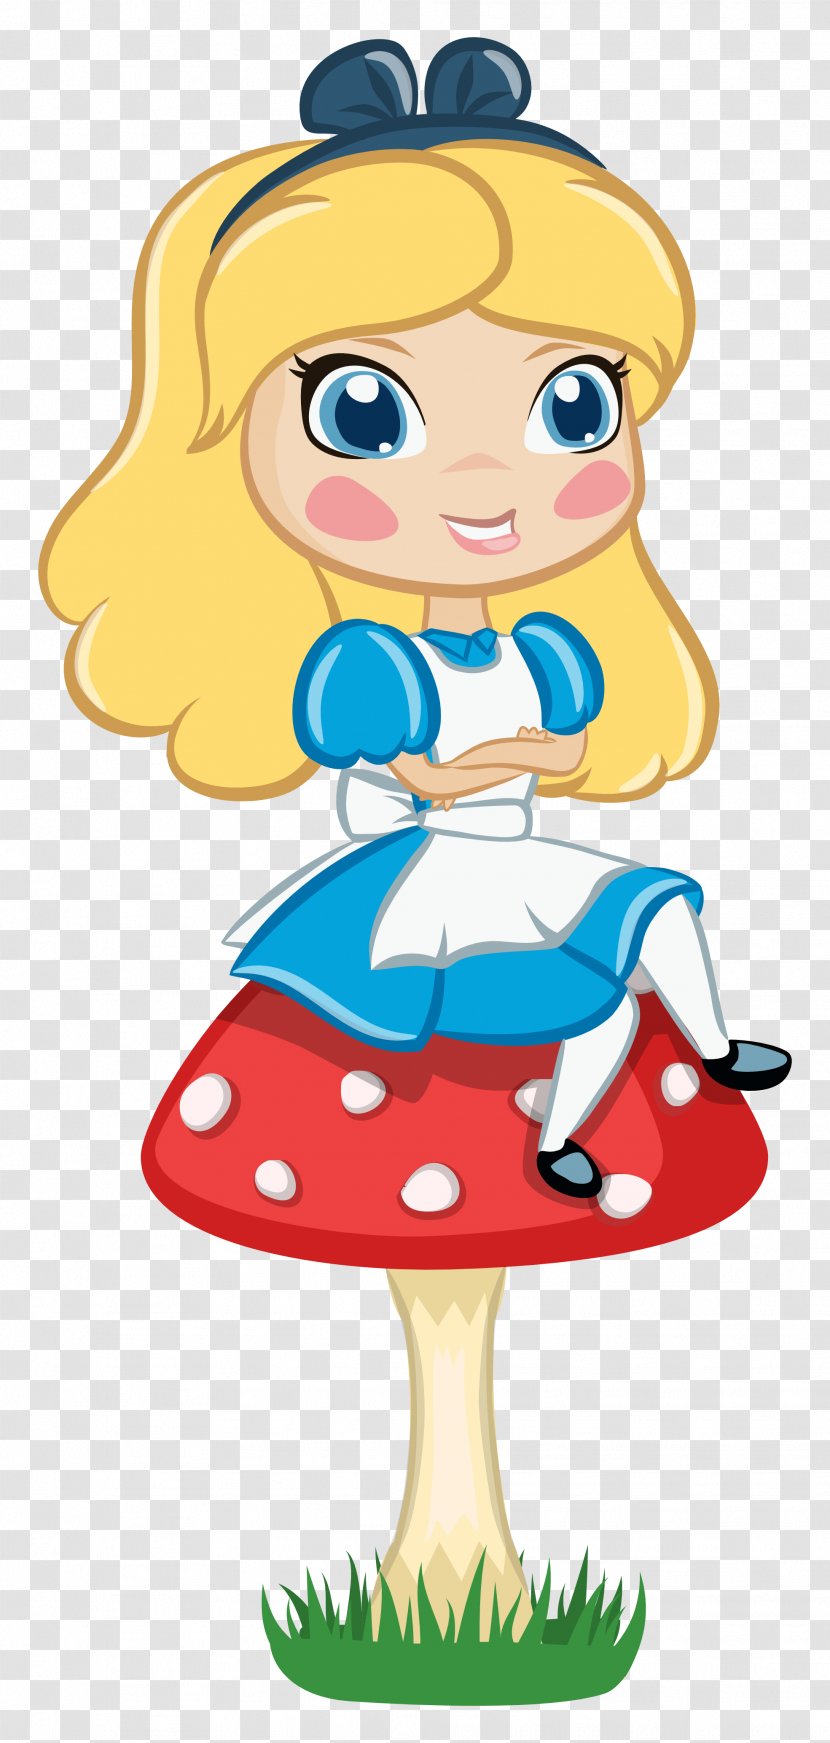 White Rabbit Alice's Adventures In Wonderland The Mad Hatter Queen Of Hearts Cheshire Cat - Fictional Character - Alice Transparent PNG